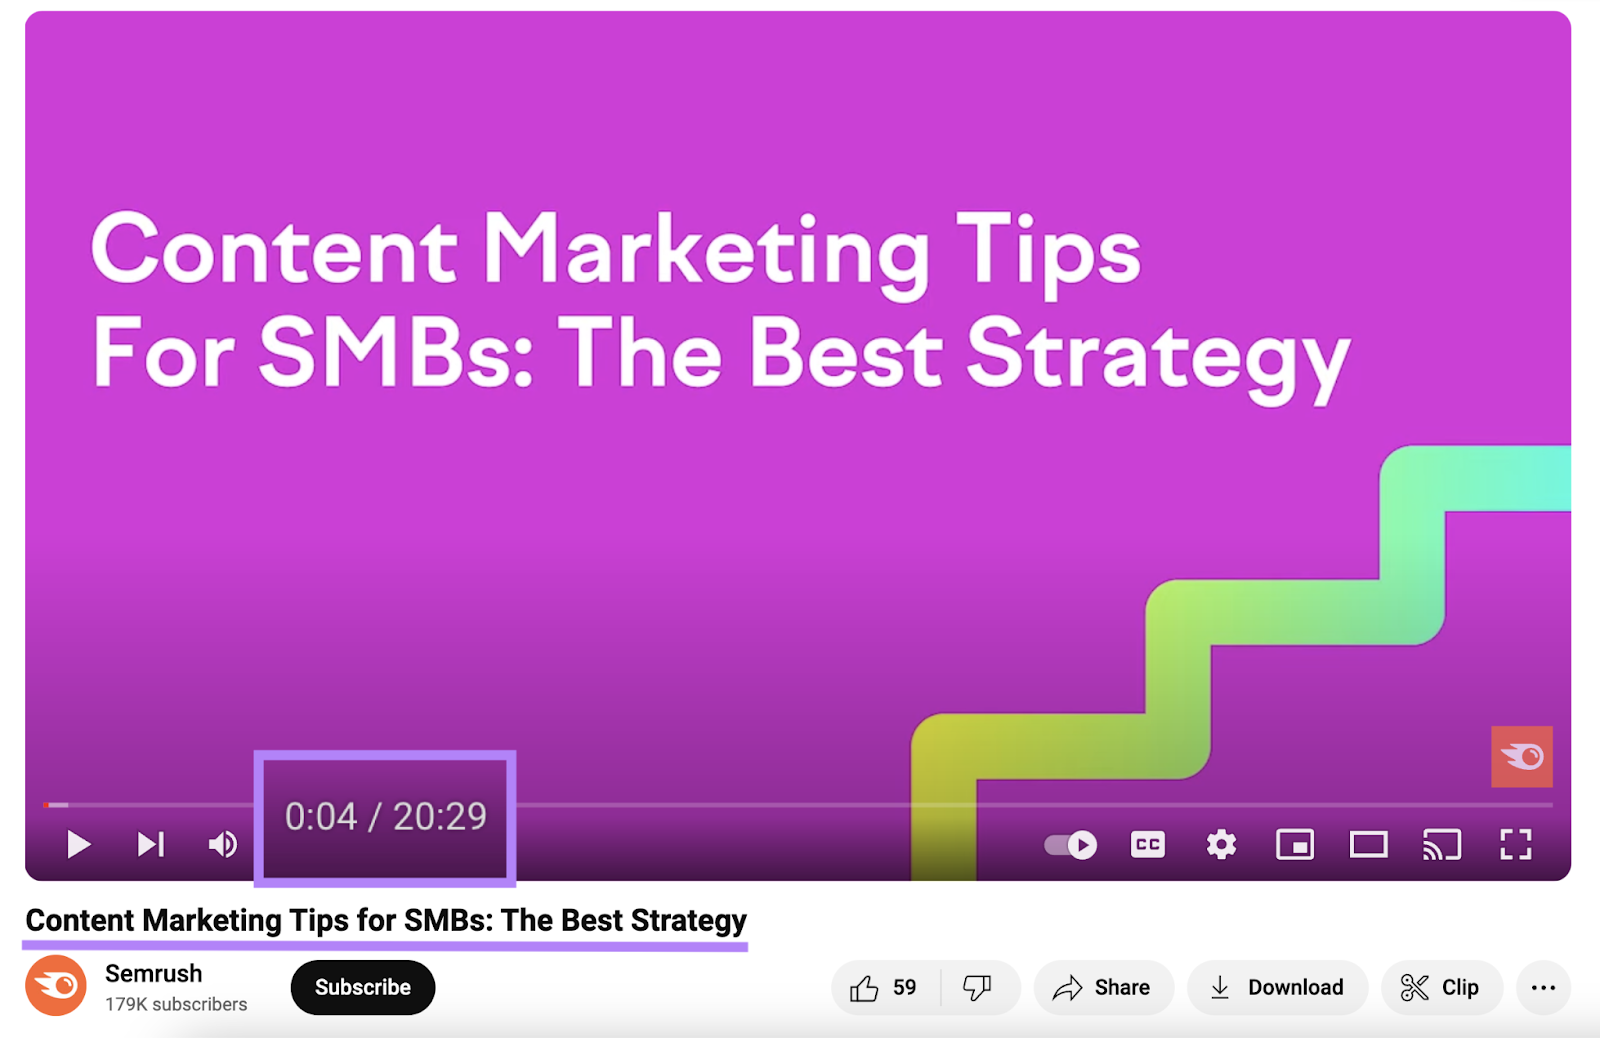 Semrush content marketing tips for smbs video highlighting the title and video length of 20 minutes